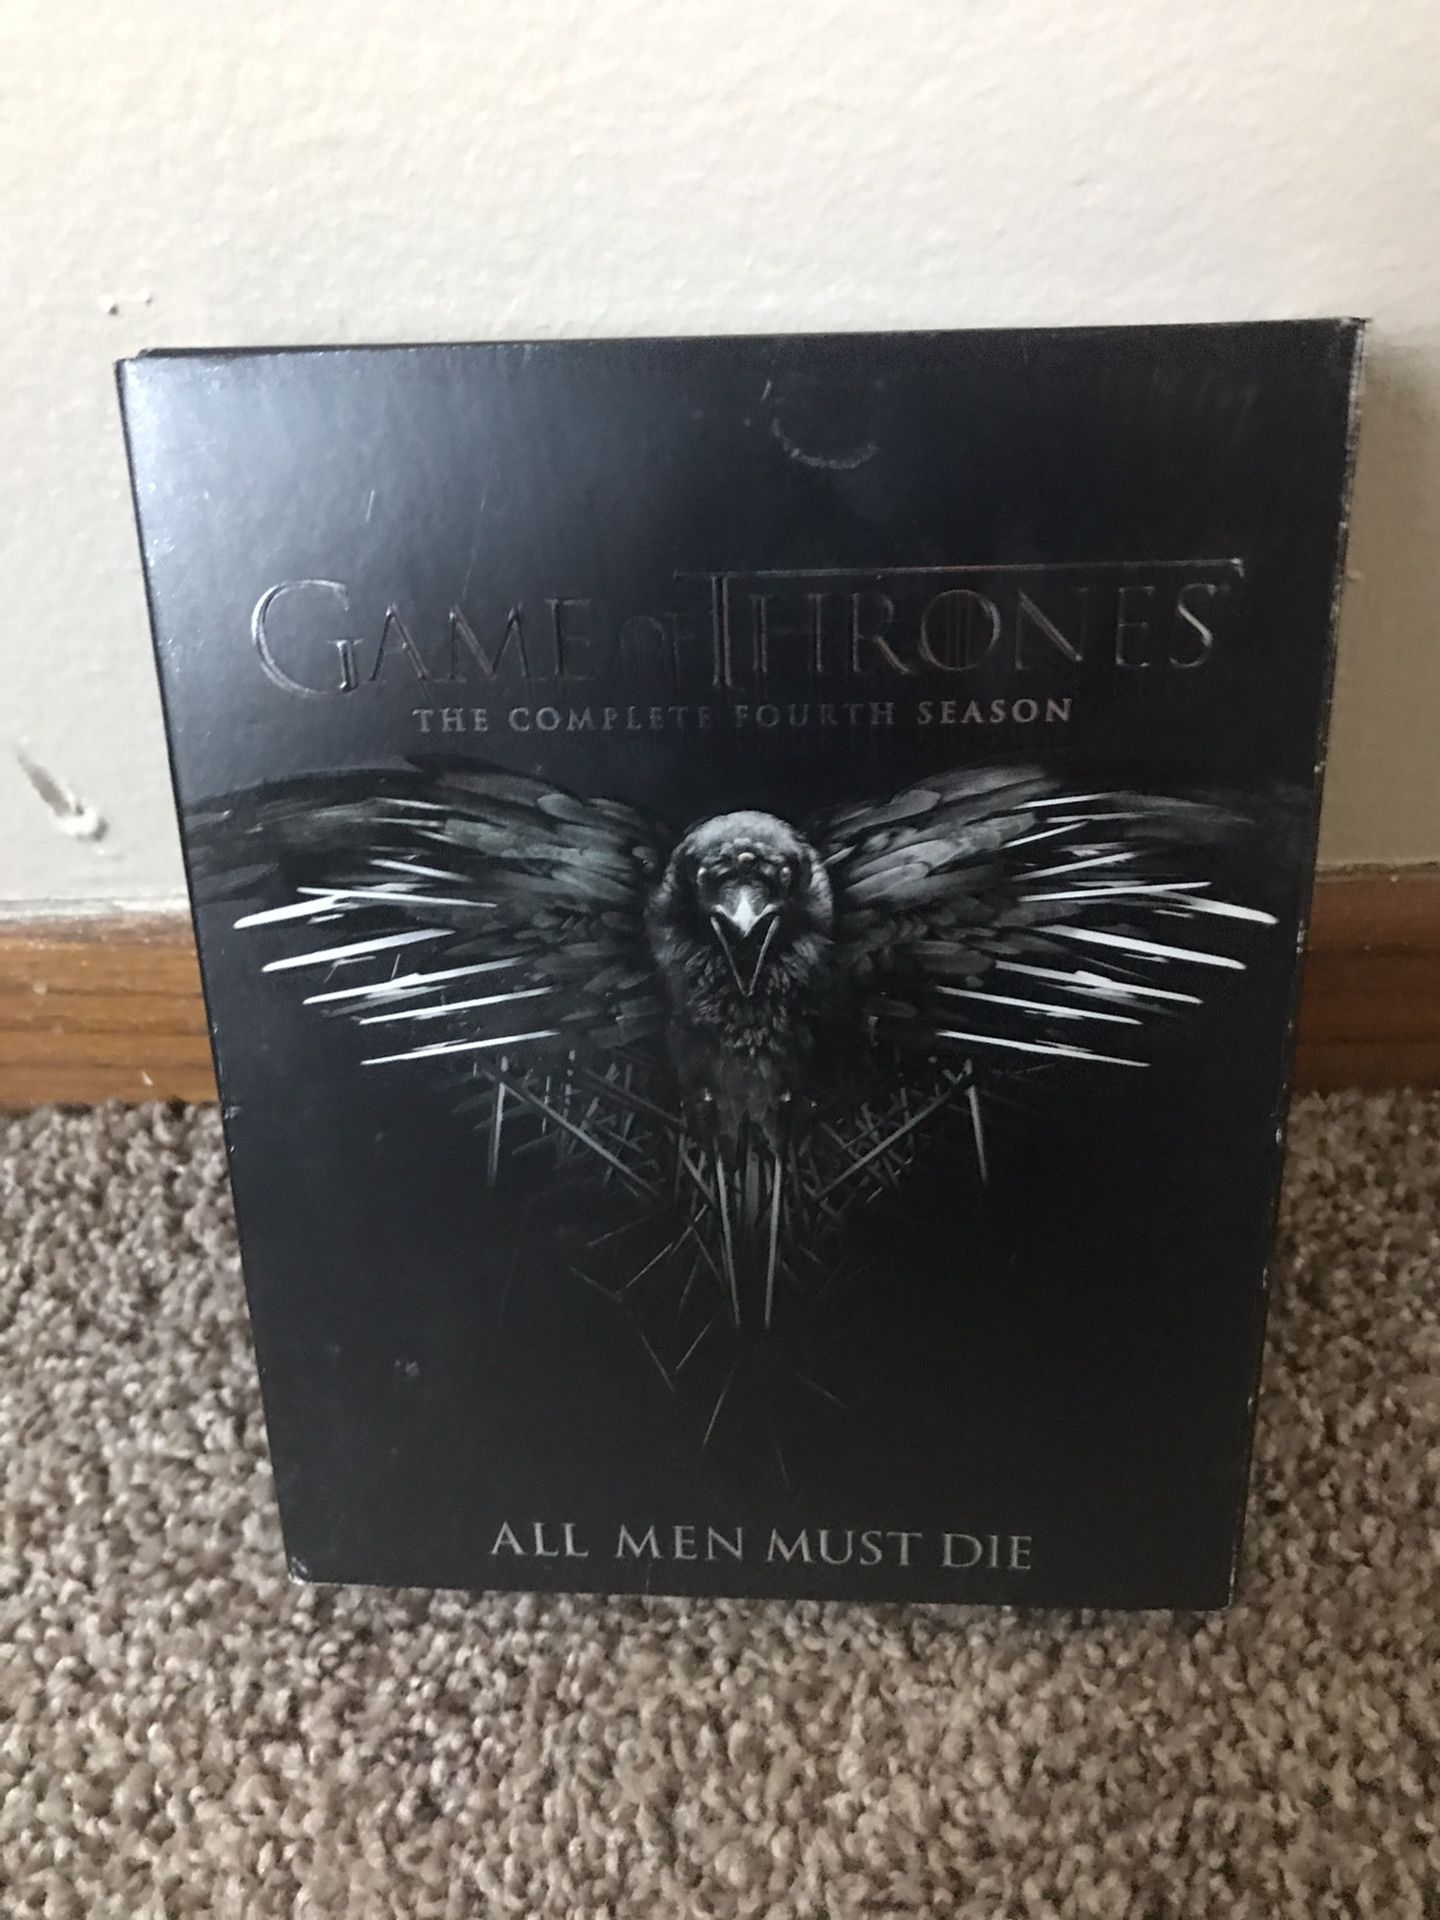 Game of Thrones complete 4th season Blu ray!